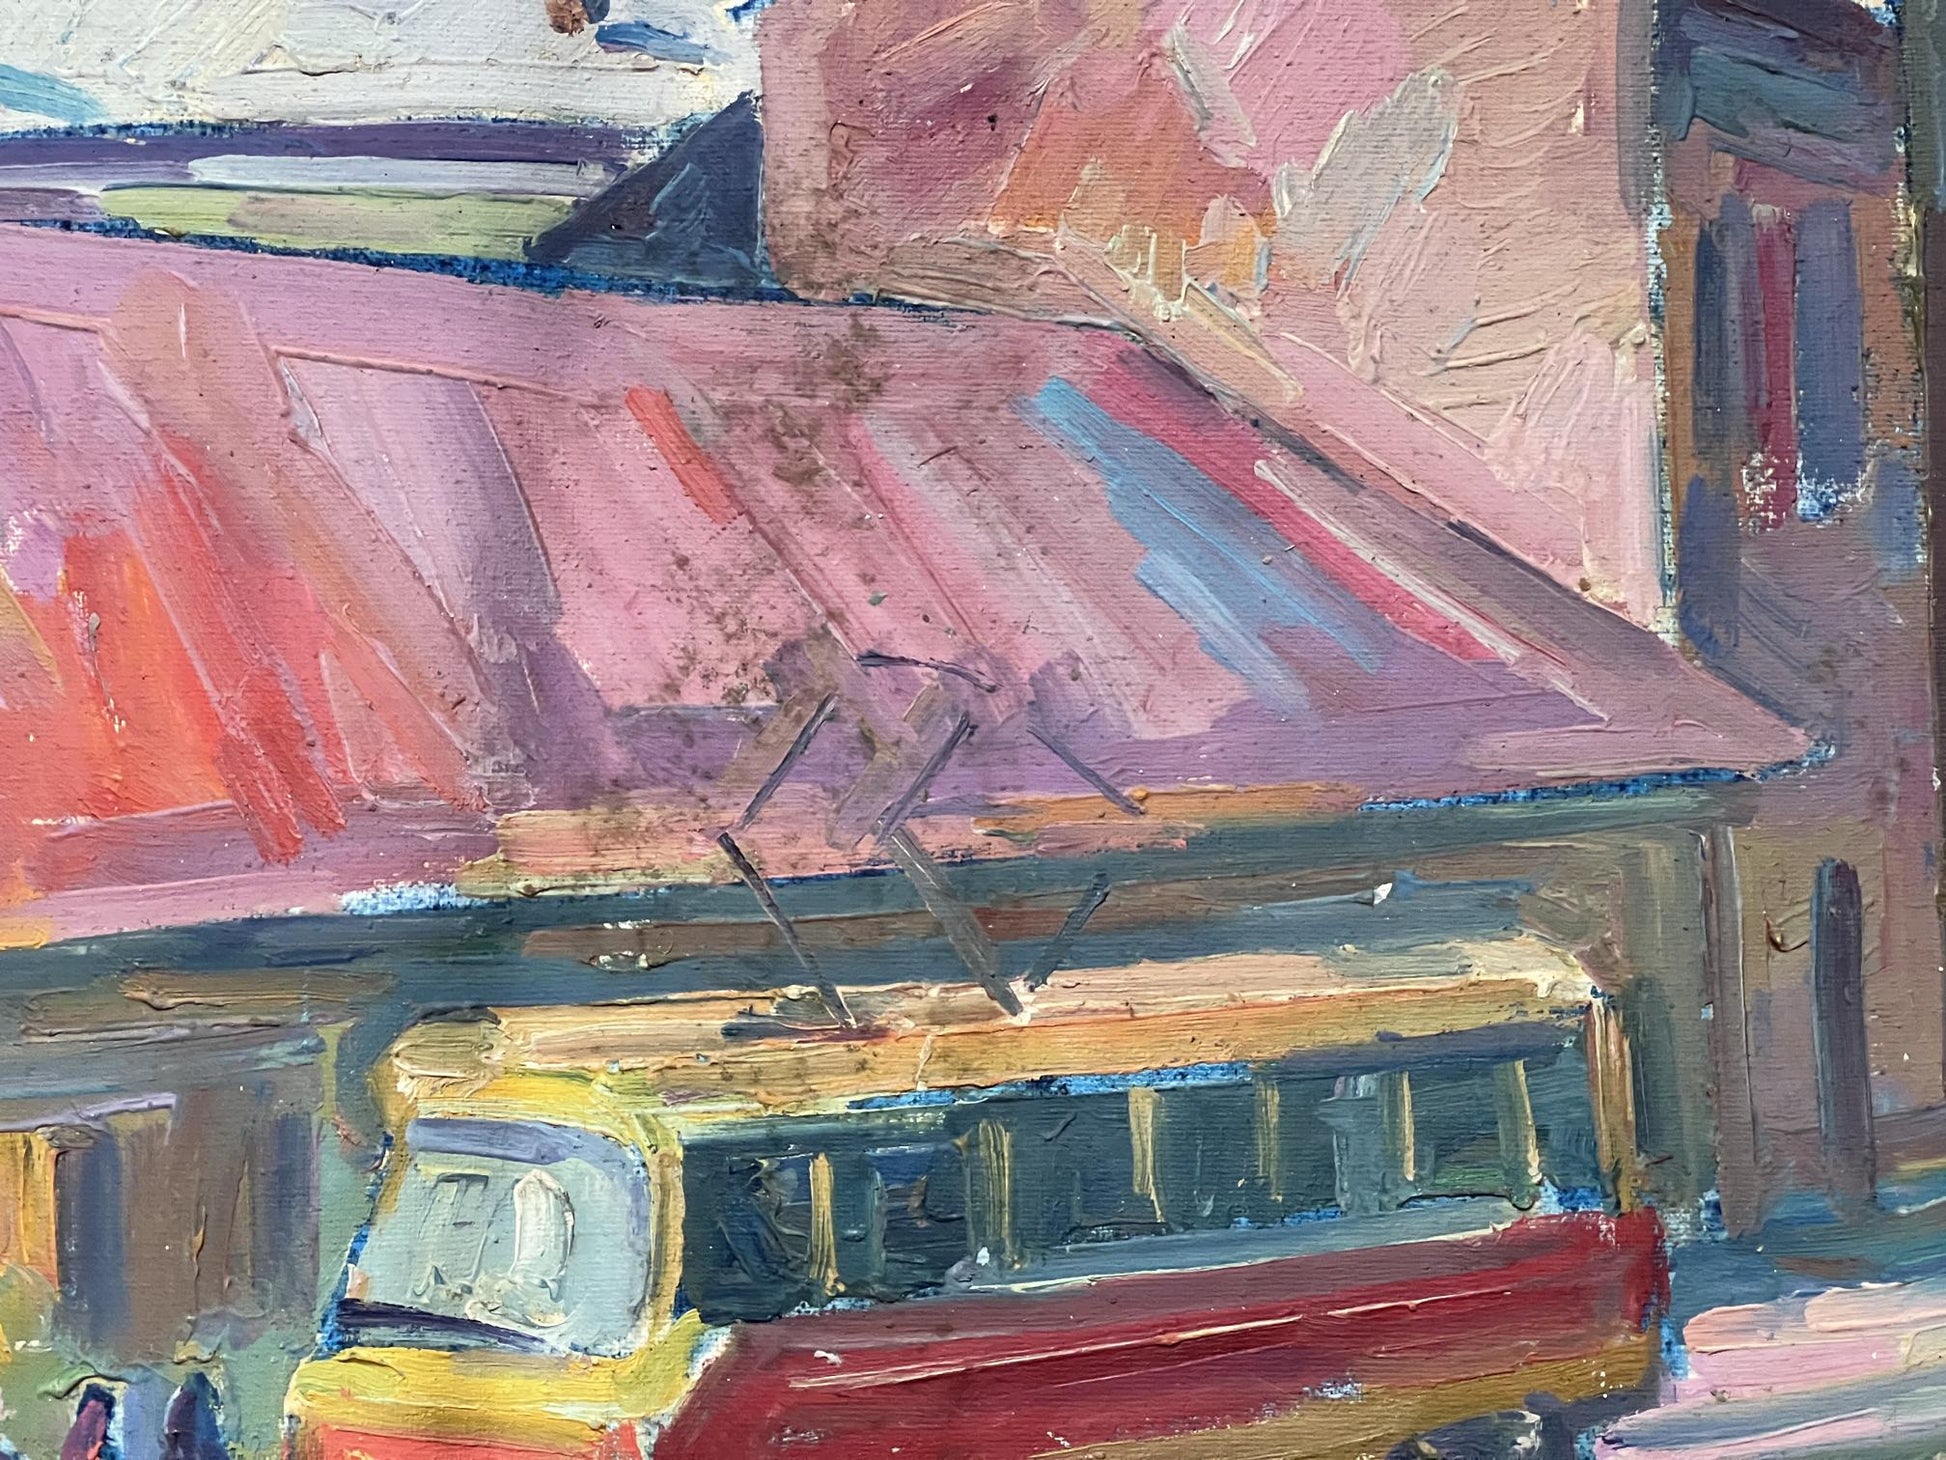 "Transit Perspectives" depicted in oil by Peter Dobrev, an abstract take on bus stops